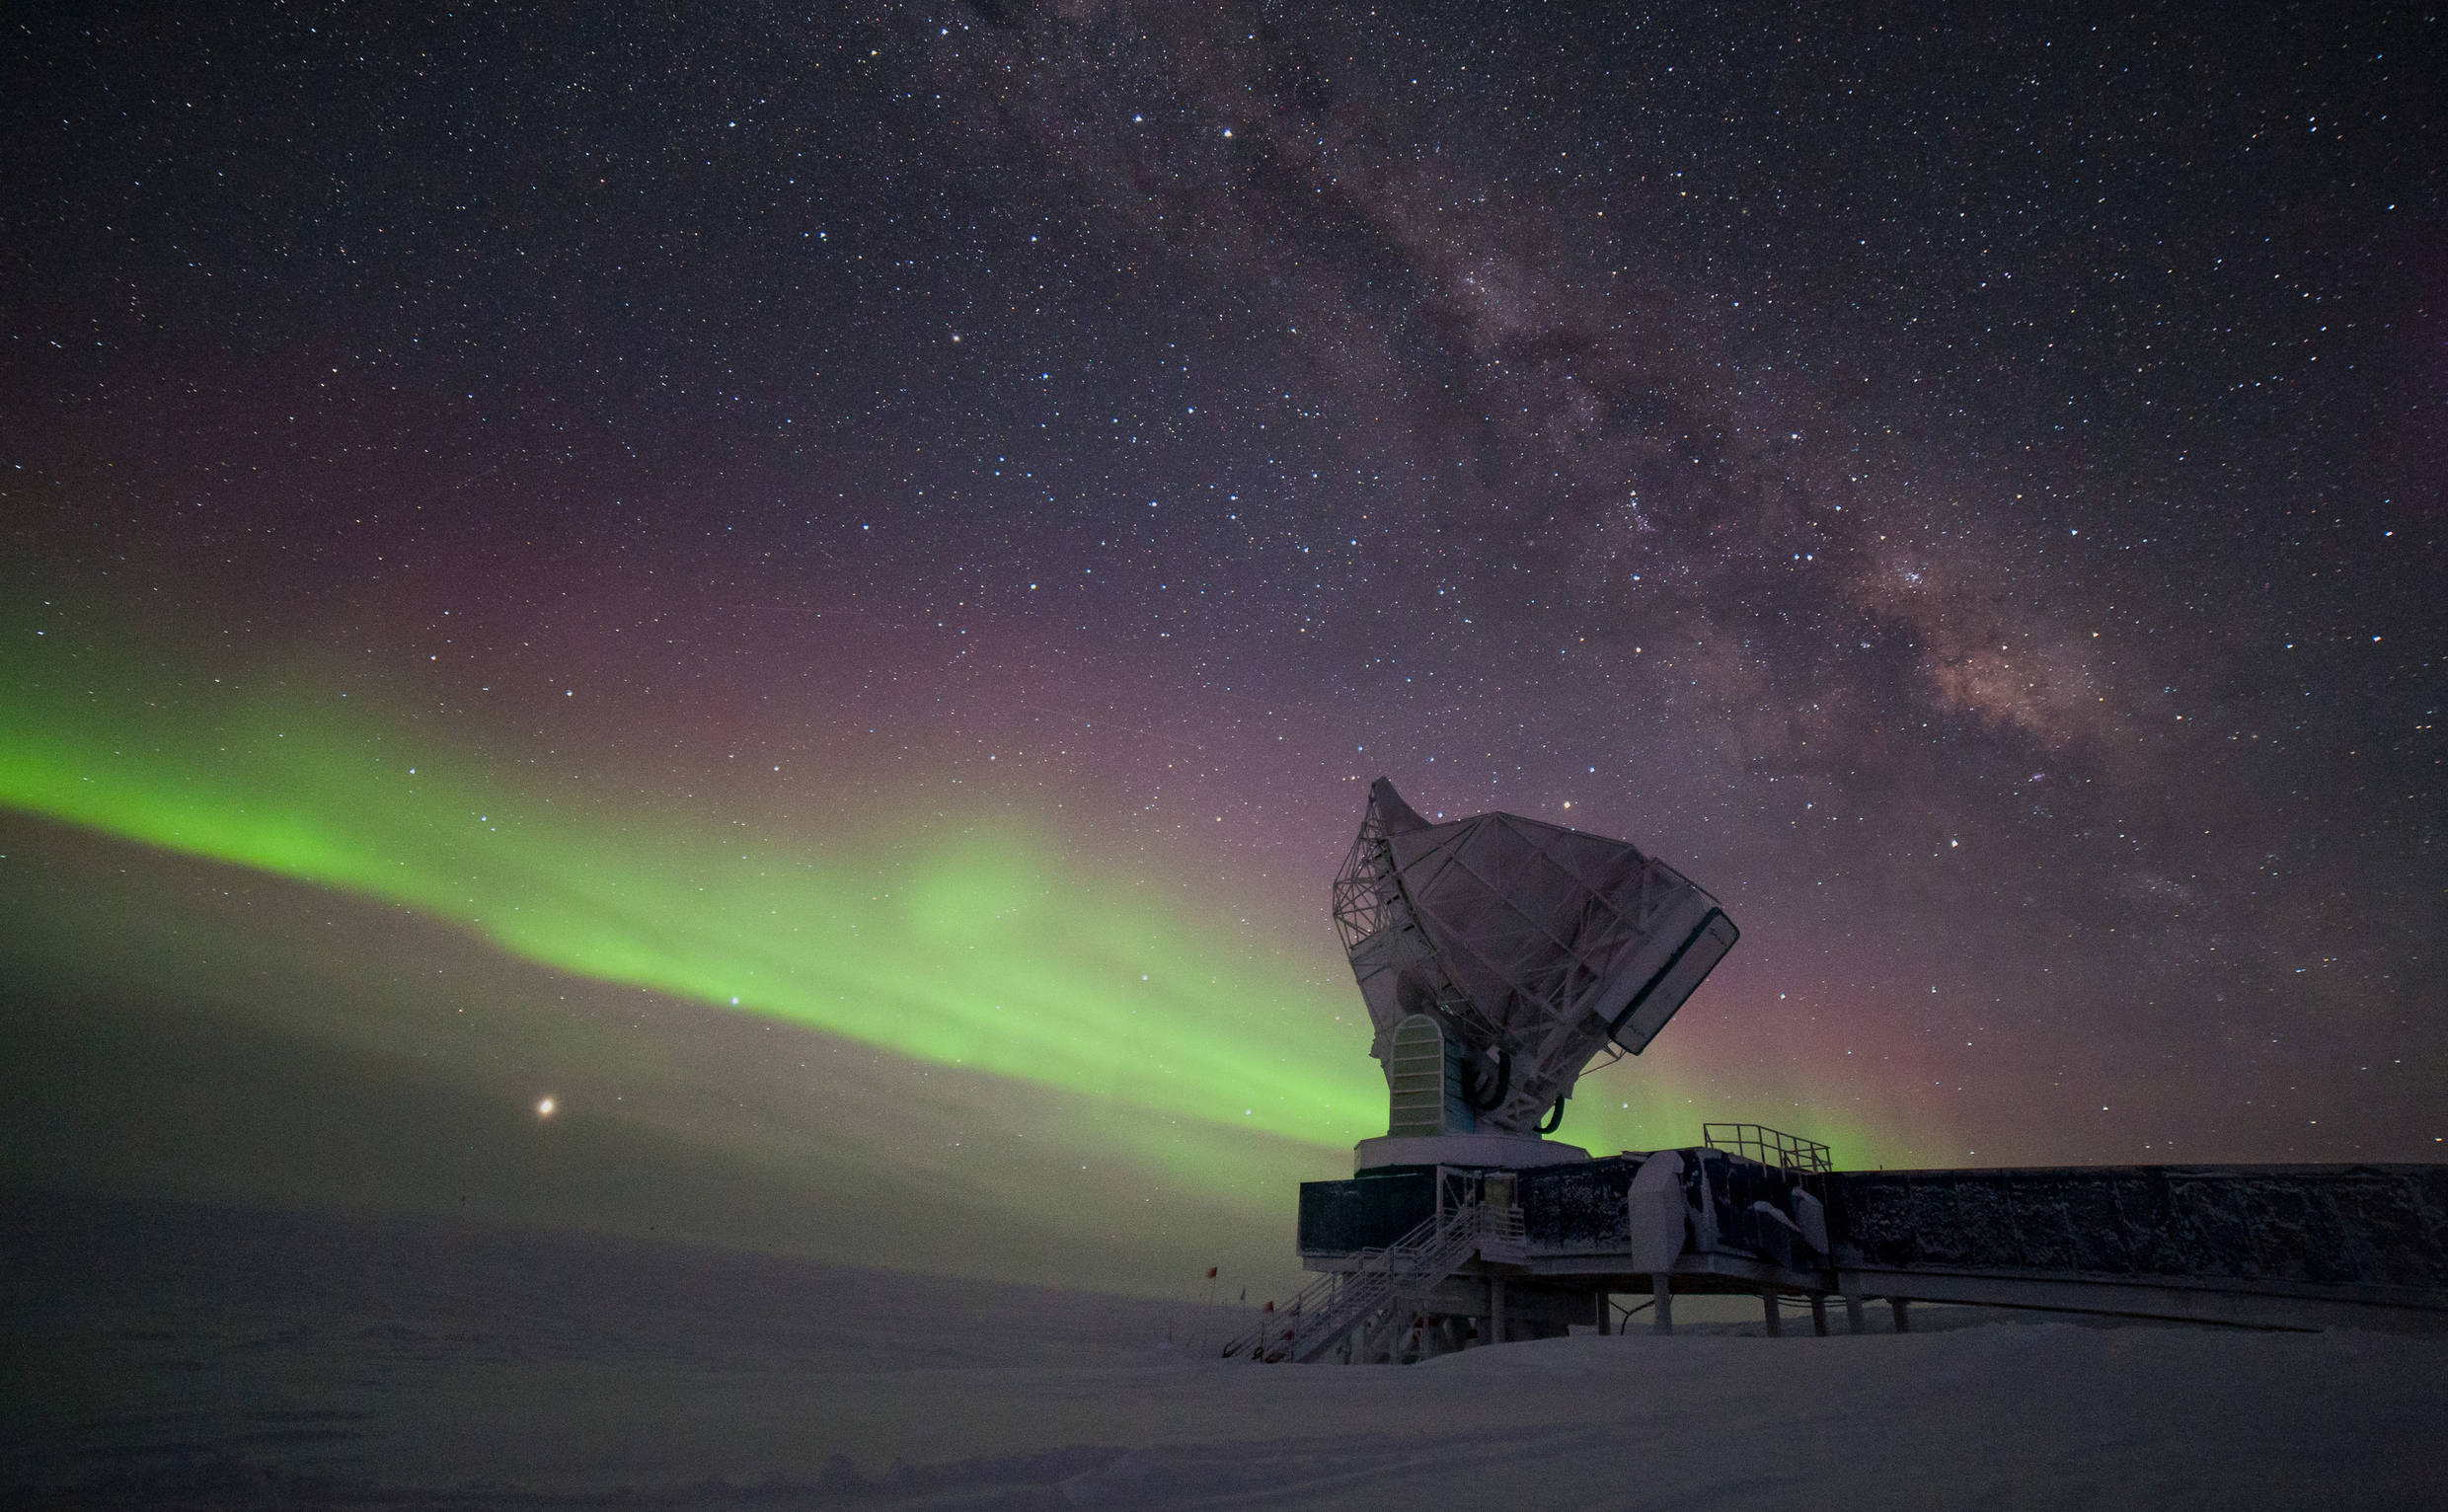 Taken in -60°C, this picture shows the South Pole Telescope illuminated by the Milky Way and some of the first aurora australis of the winter season 2017. Jupiter is brightly visible on the lower left, Saturn is to the right of the telescope dish. 